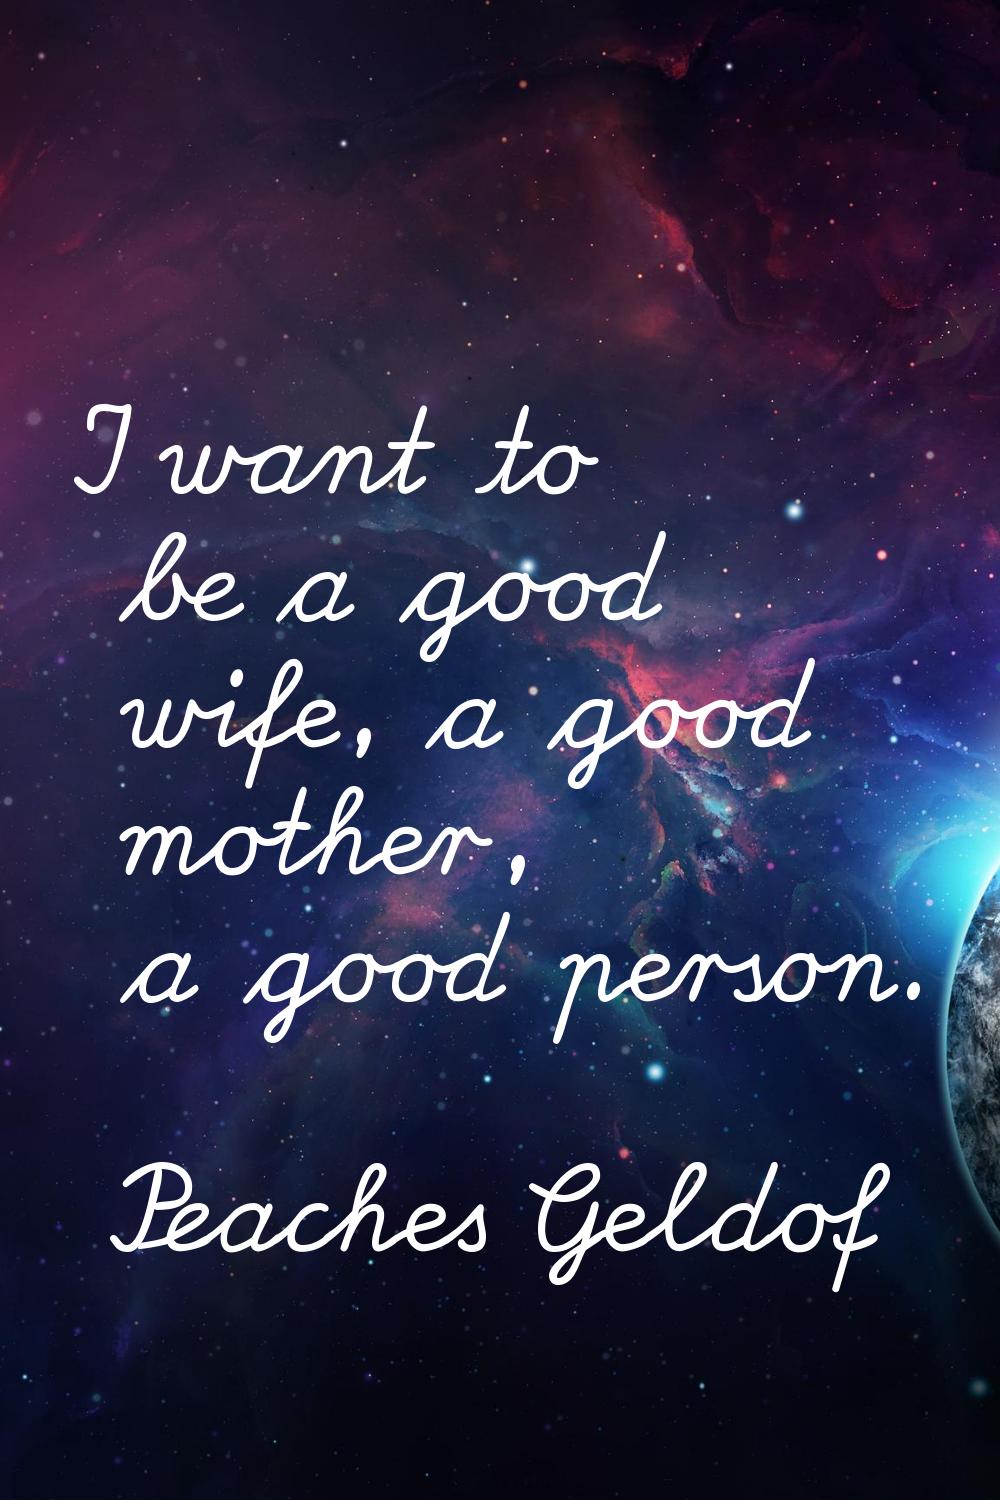 I want to be a good wife, a good mother, a good person.